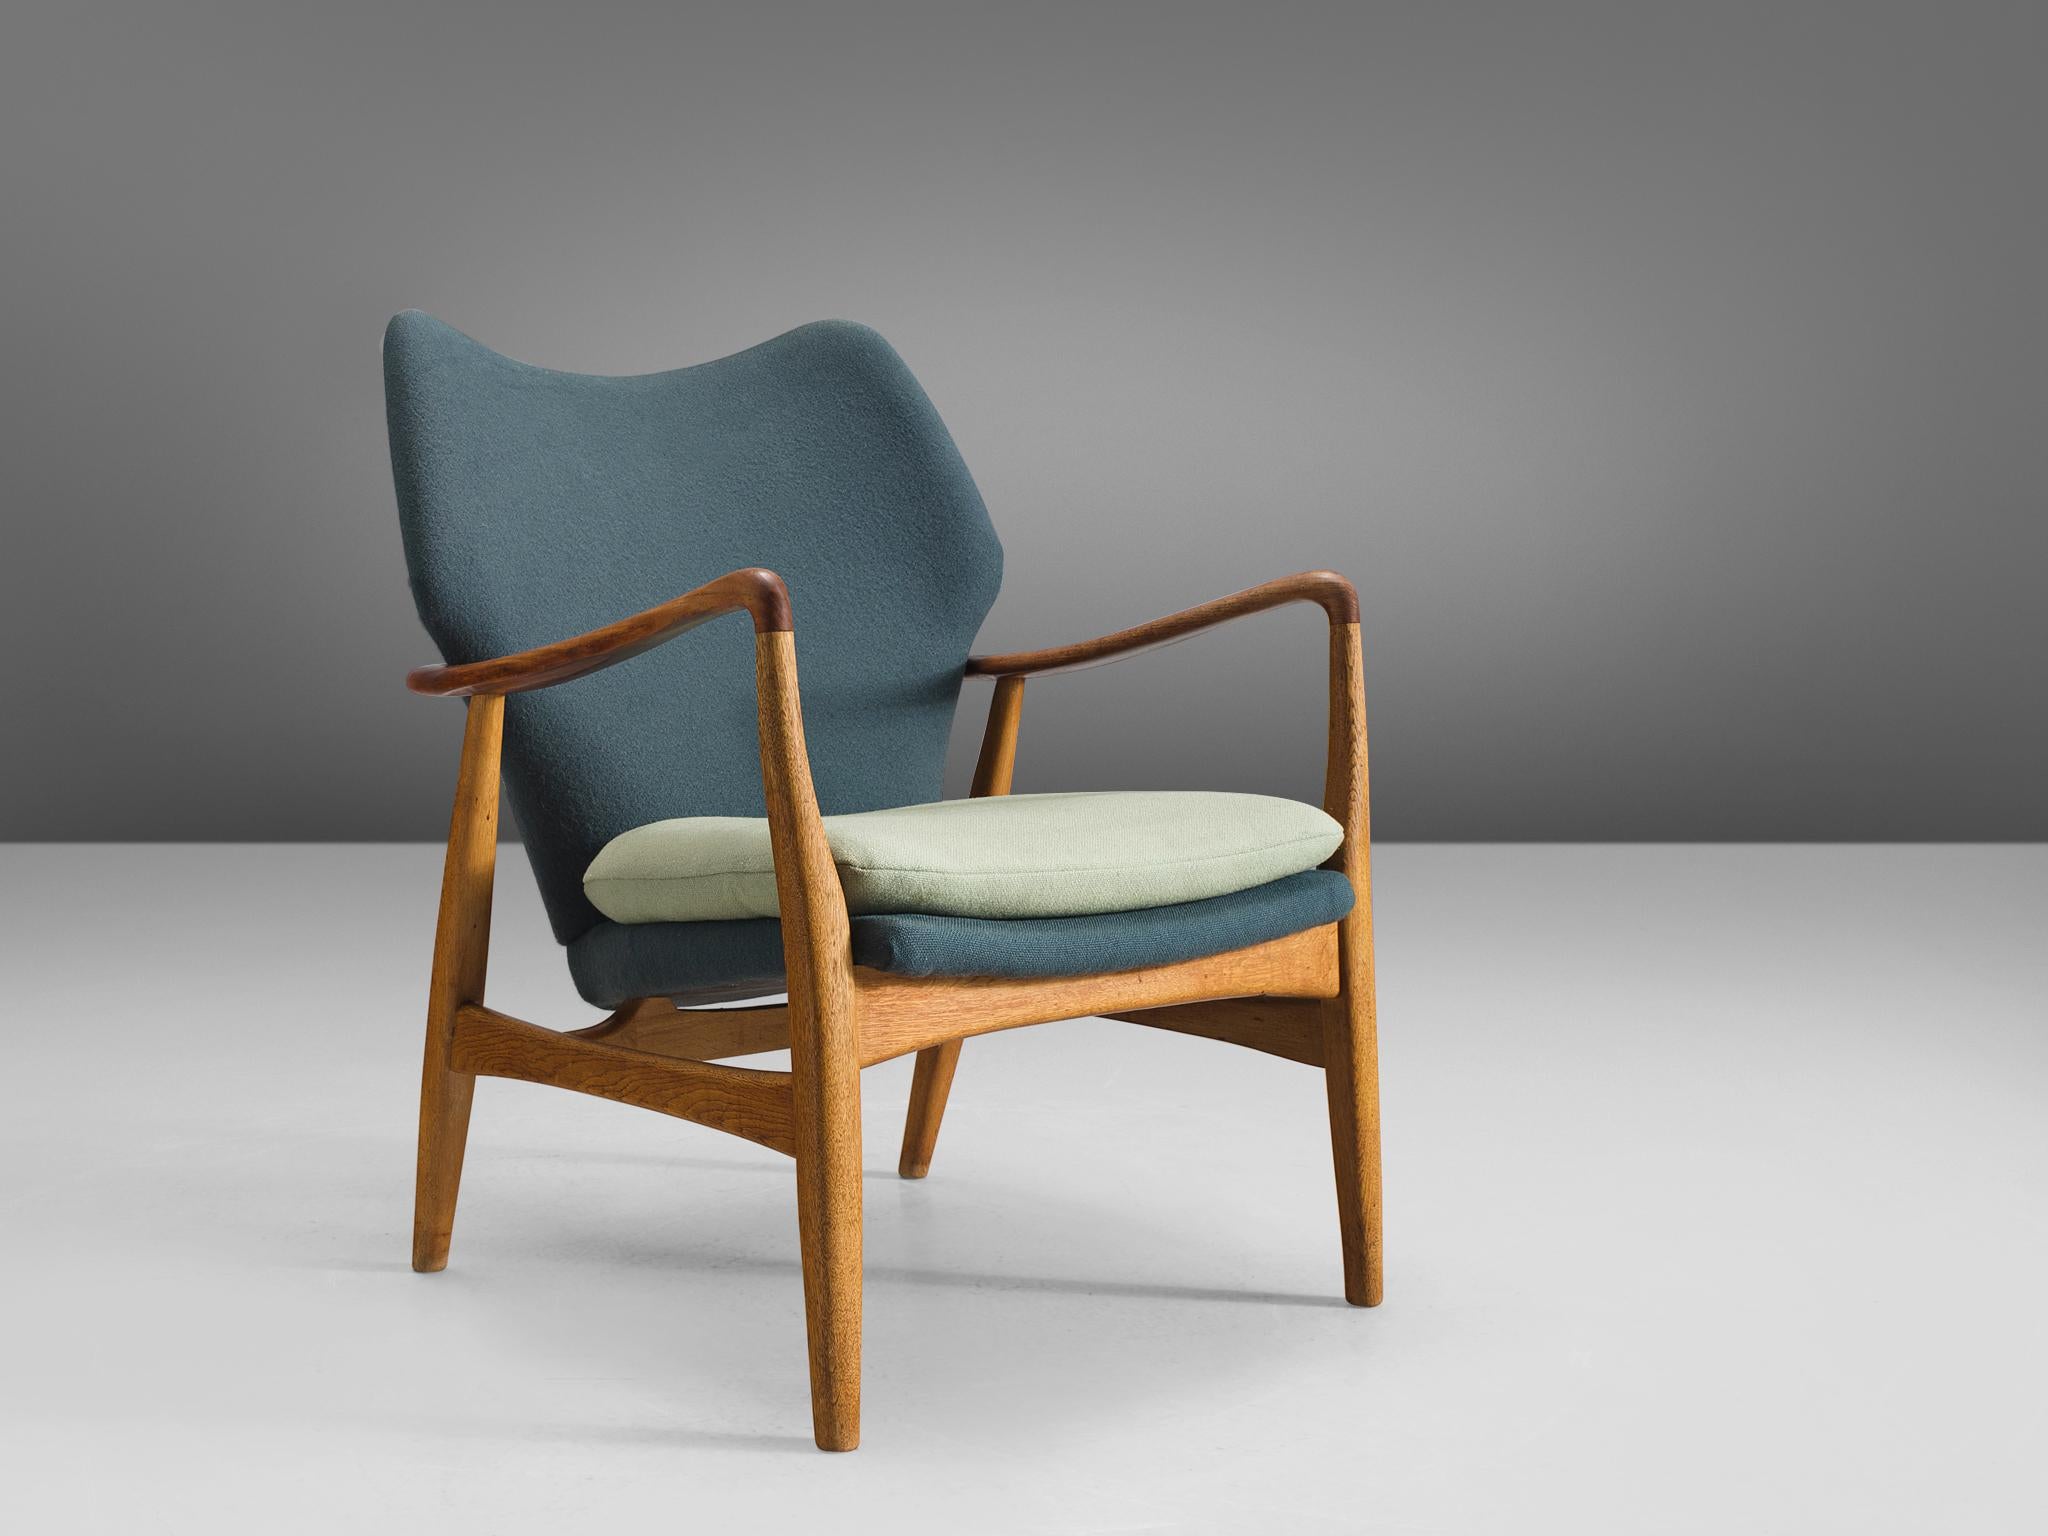 Aksel Bender Madsen for Bovenkamp, oak and teak and turquoise and light green fabric, Denmark, 1950s.

This lady lounge chair by Madsen is executed by Bovenkamp. Madsen is known for his modest, Minimalist designs that are often executed in teak or